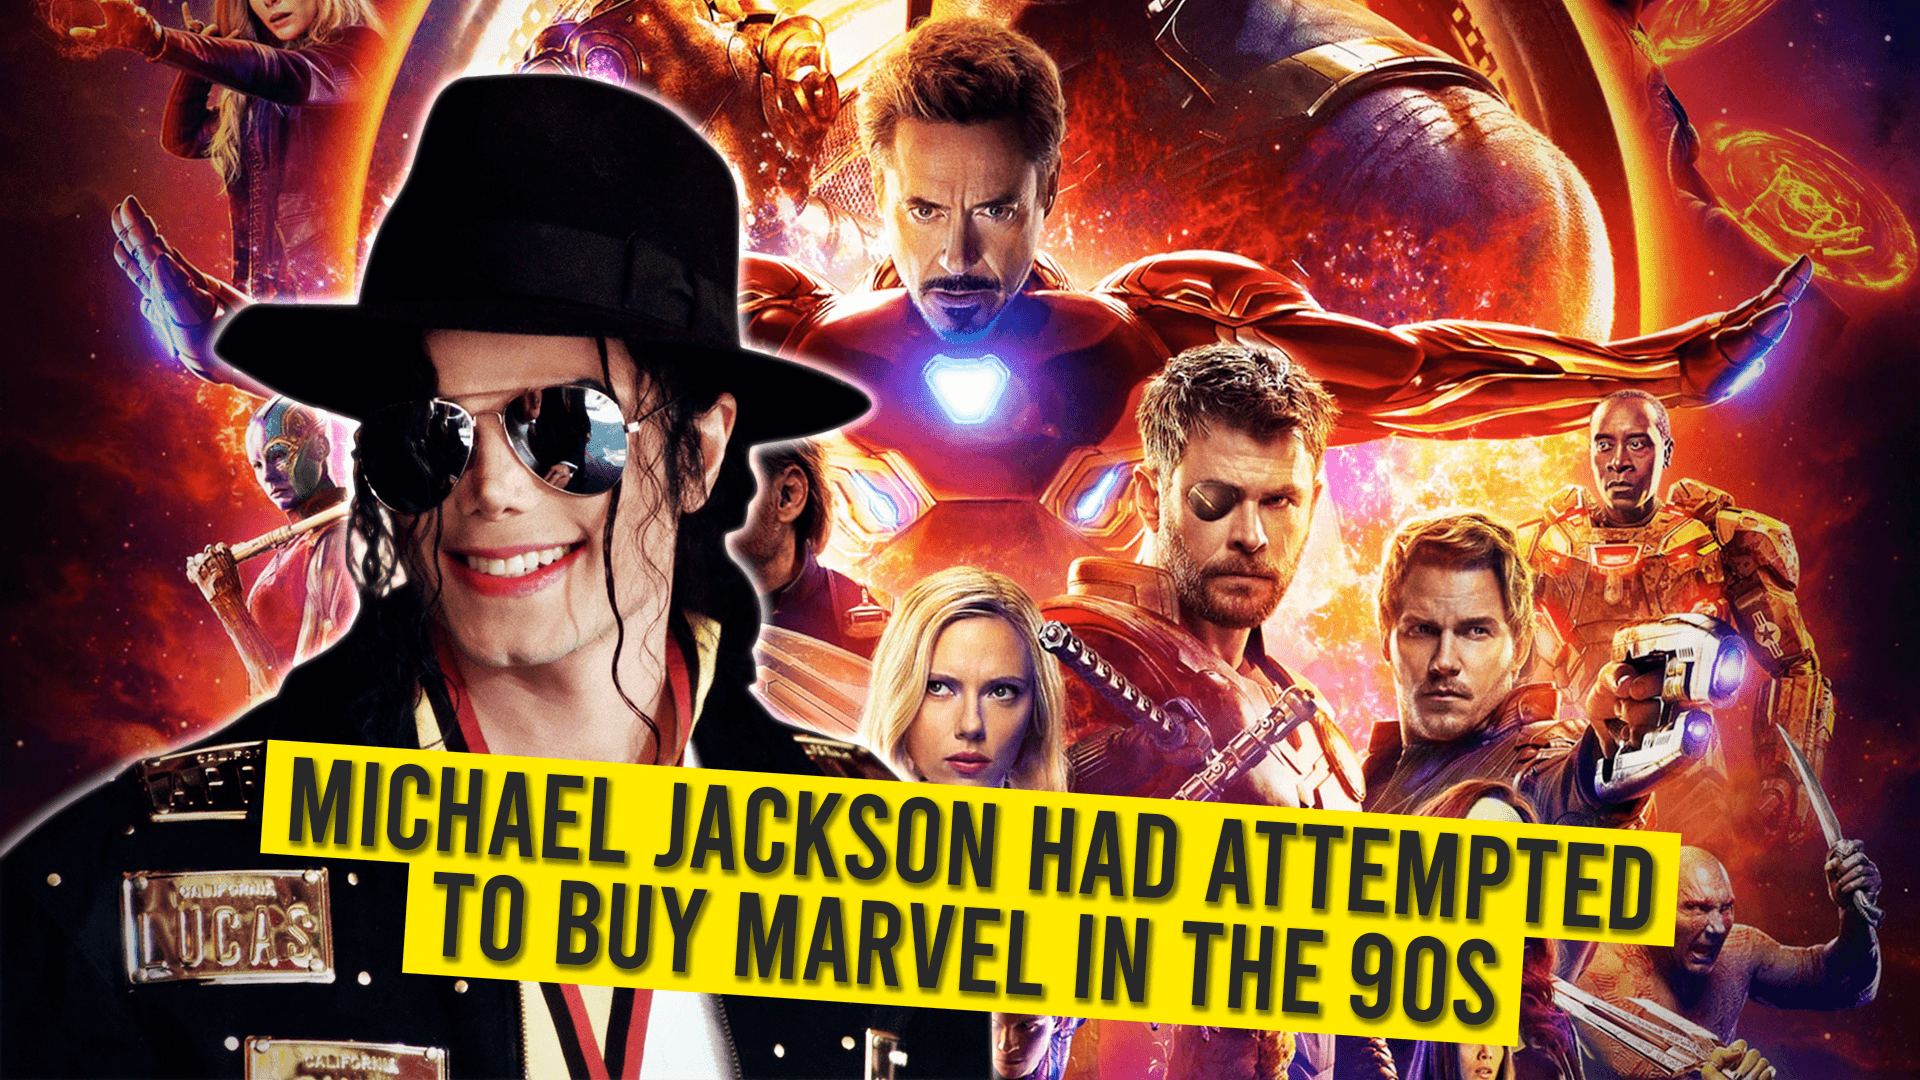 02 Michael Jackson had attempted to Buy Marvel in the 90s